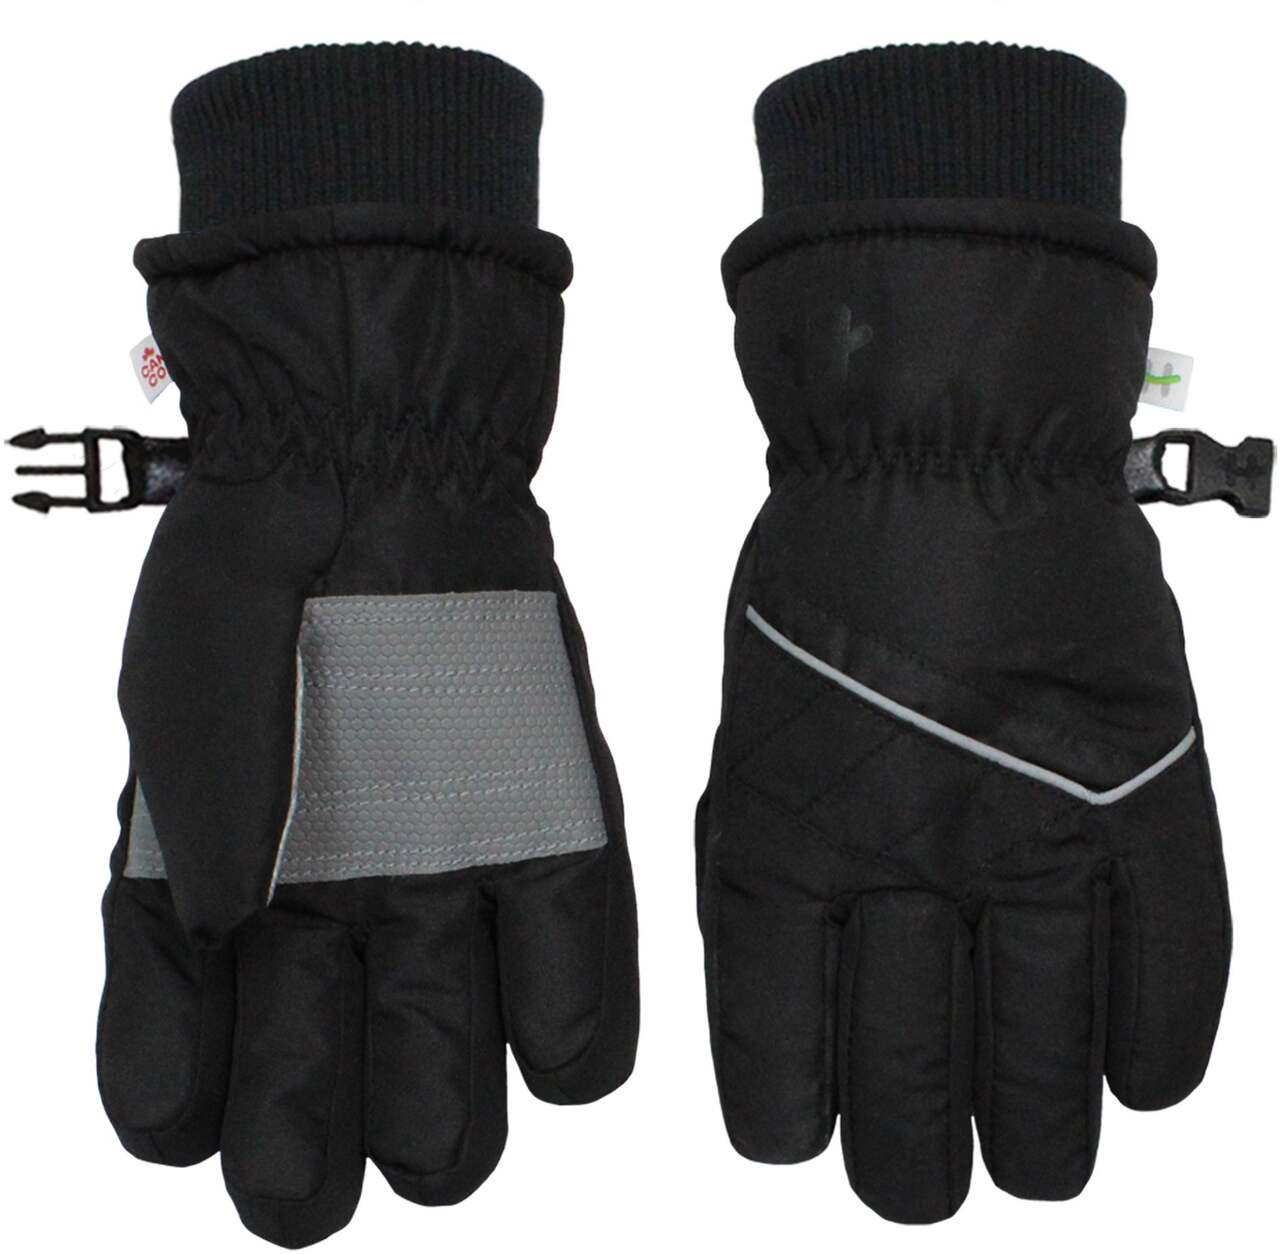 Hot Paws Kids Thermal Insulated Winter Ski Snowboard Gloves Waterproof With  Palm Grips